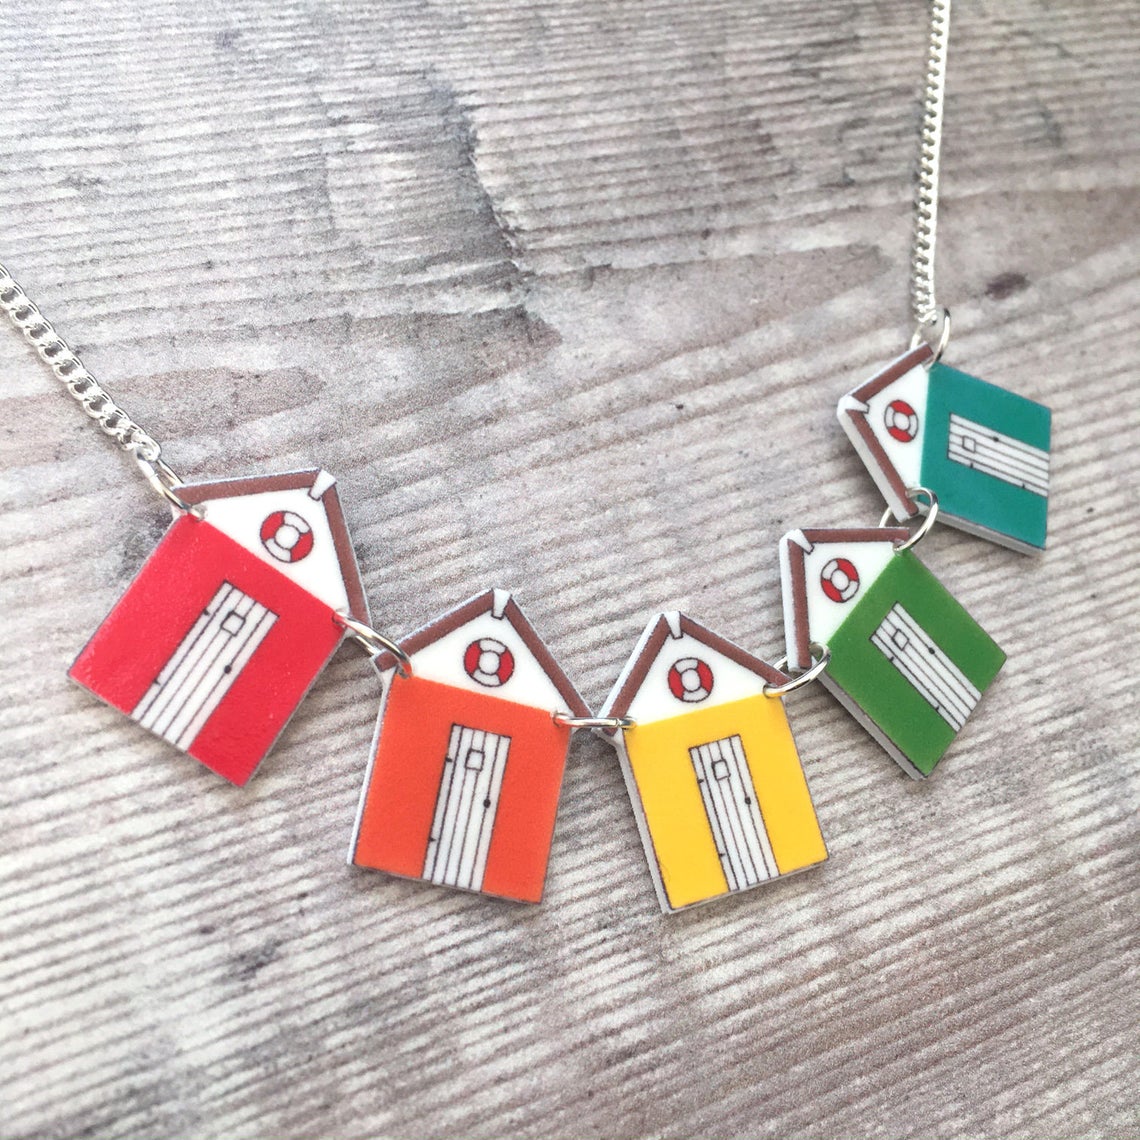 Beach hut necklace - Bunting necklace - Bright rainbow colours - Summer jewellery